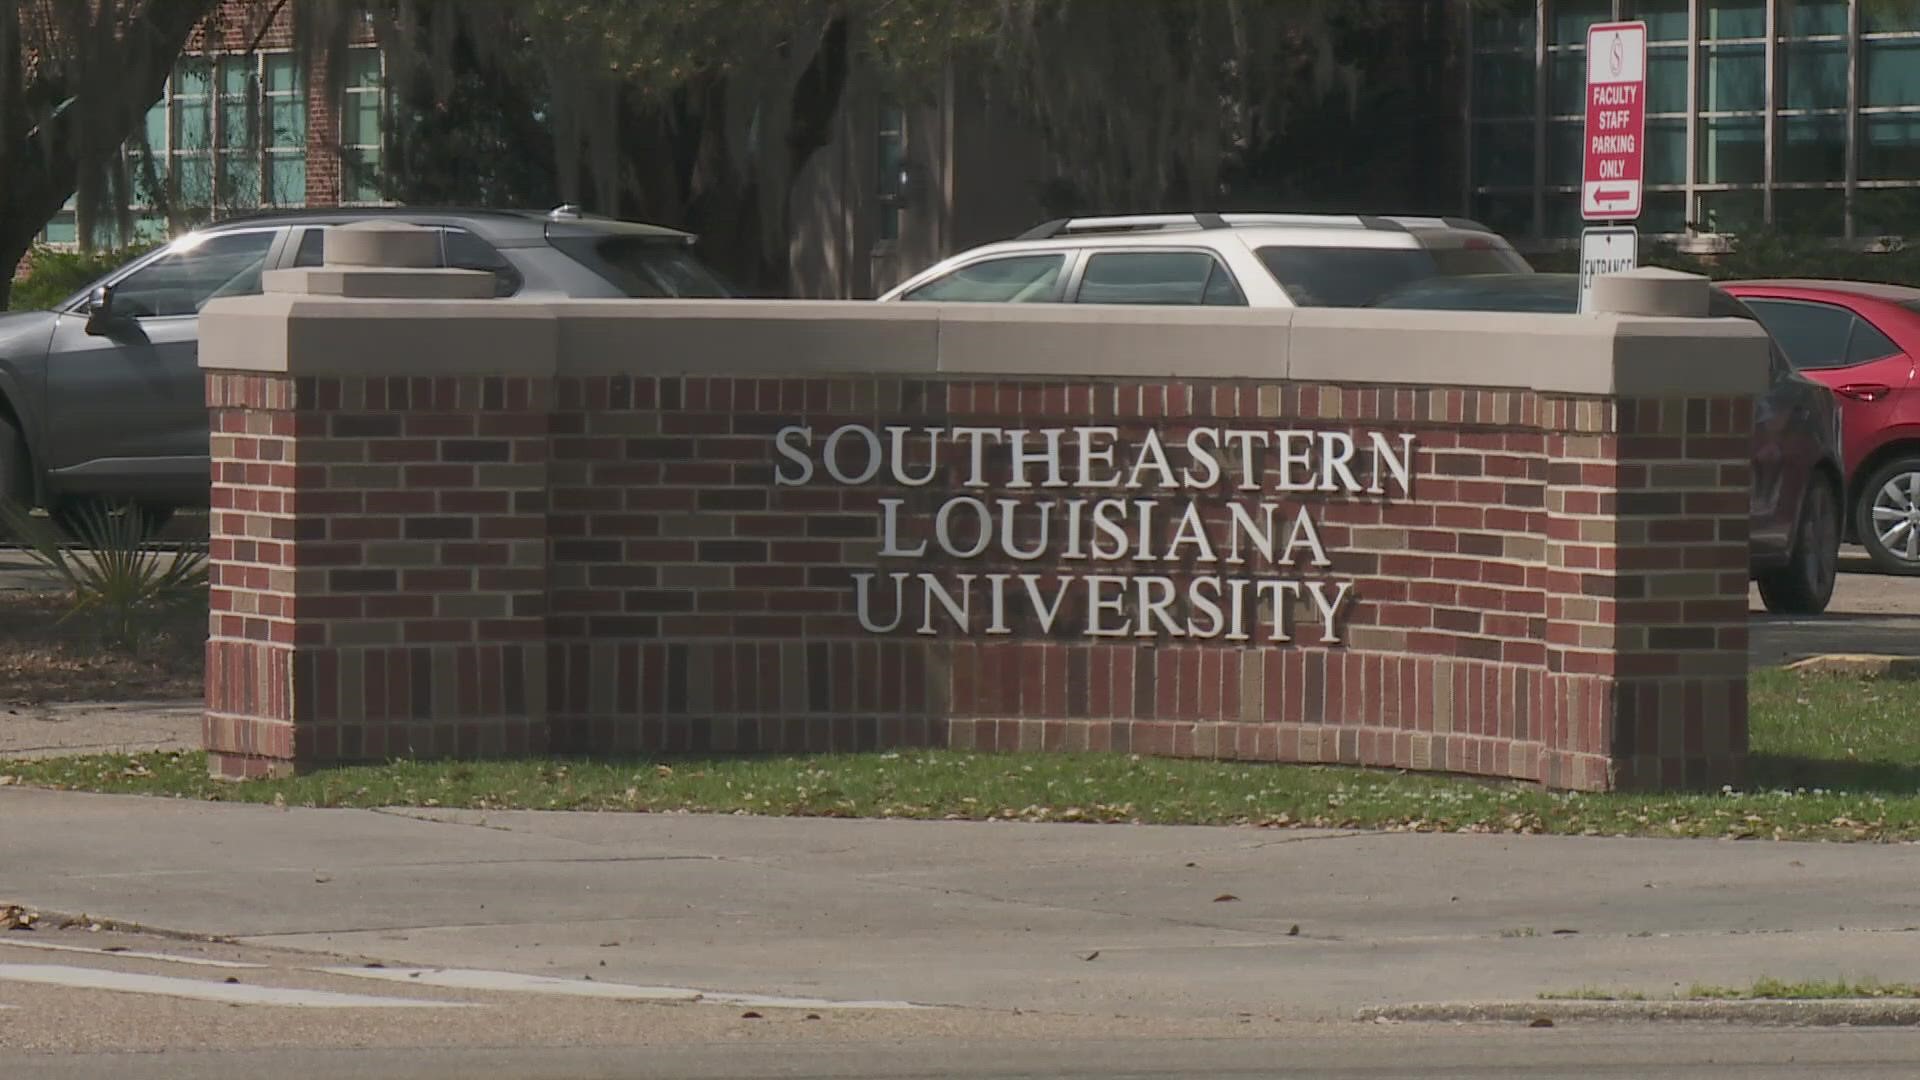 State and campus officials stopped short of calling the situation at SLU, a cyberattack.